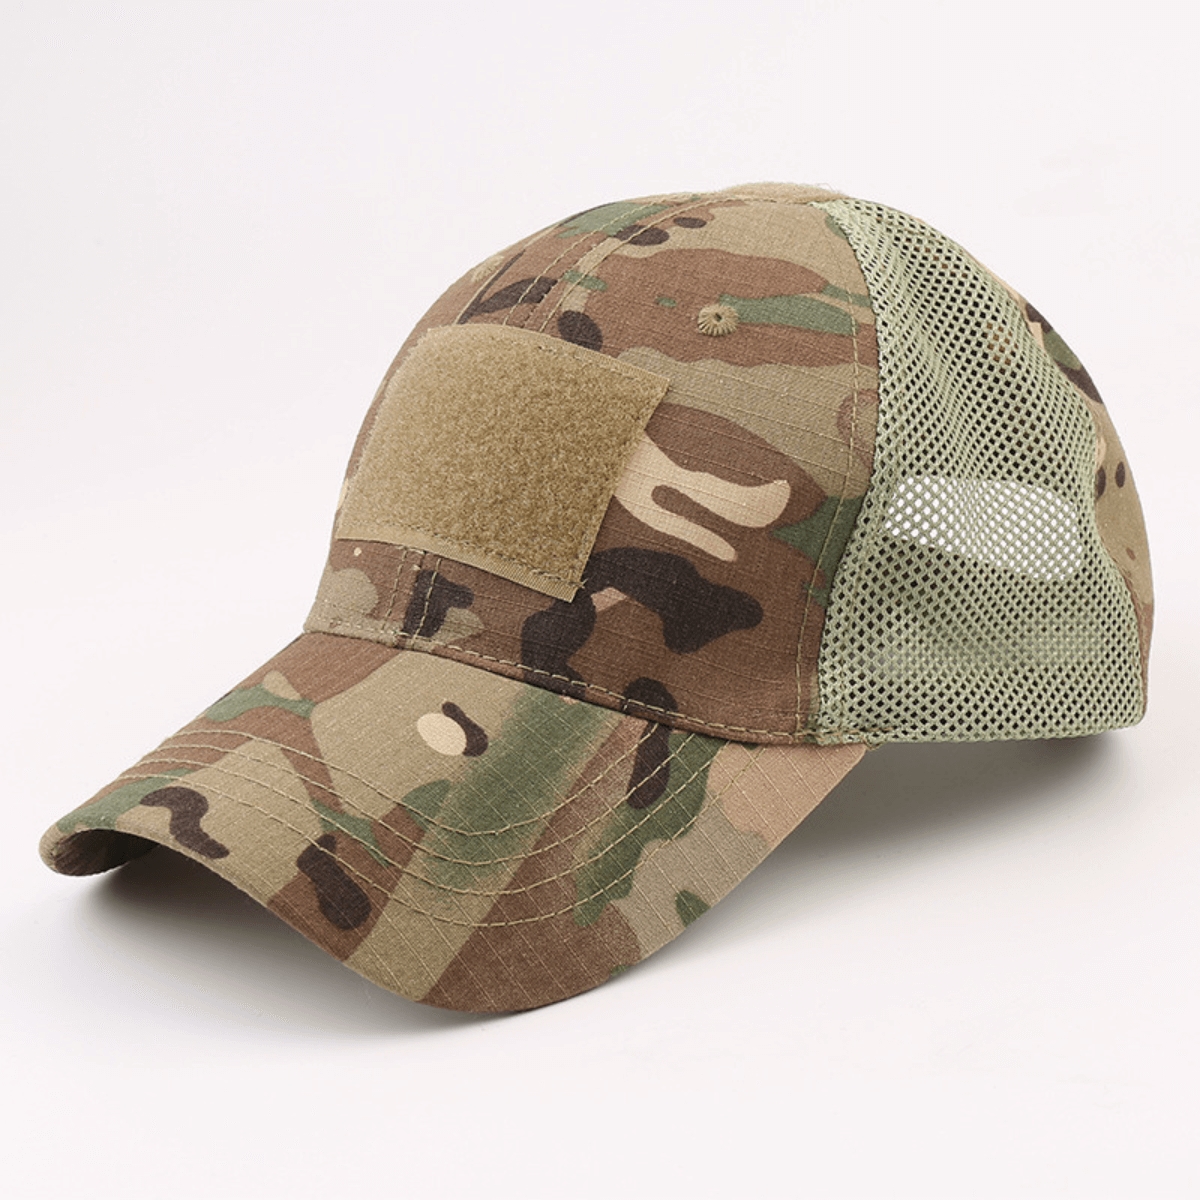 Picture of JupiterGear JG-HAT2-LGTCAMO Military-Style Tactical Patch Hat with Adjustable Strap (JG-HAT2) Light Camo